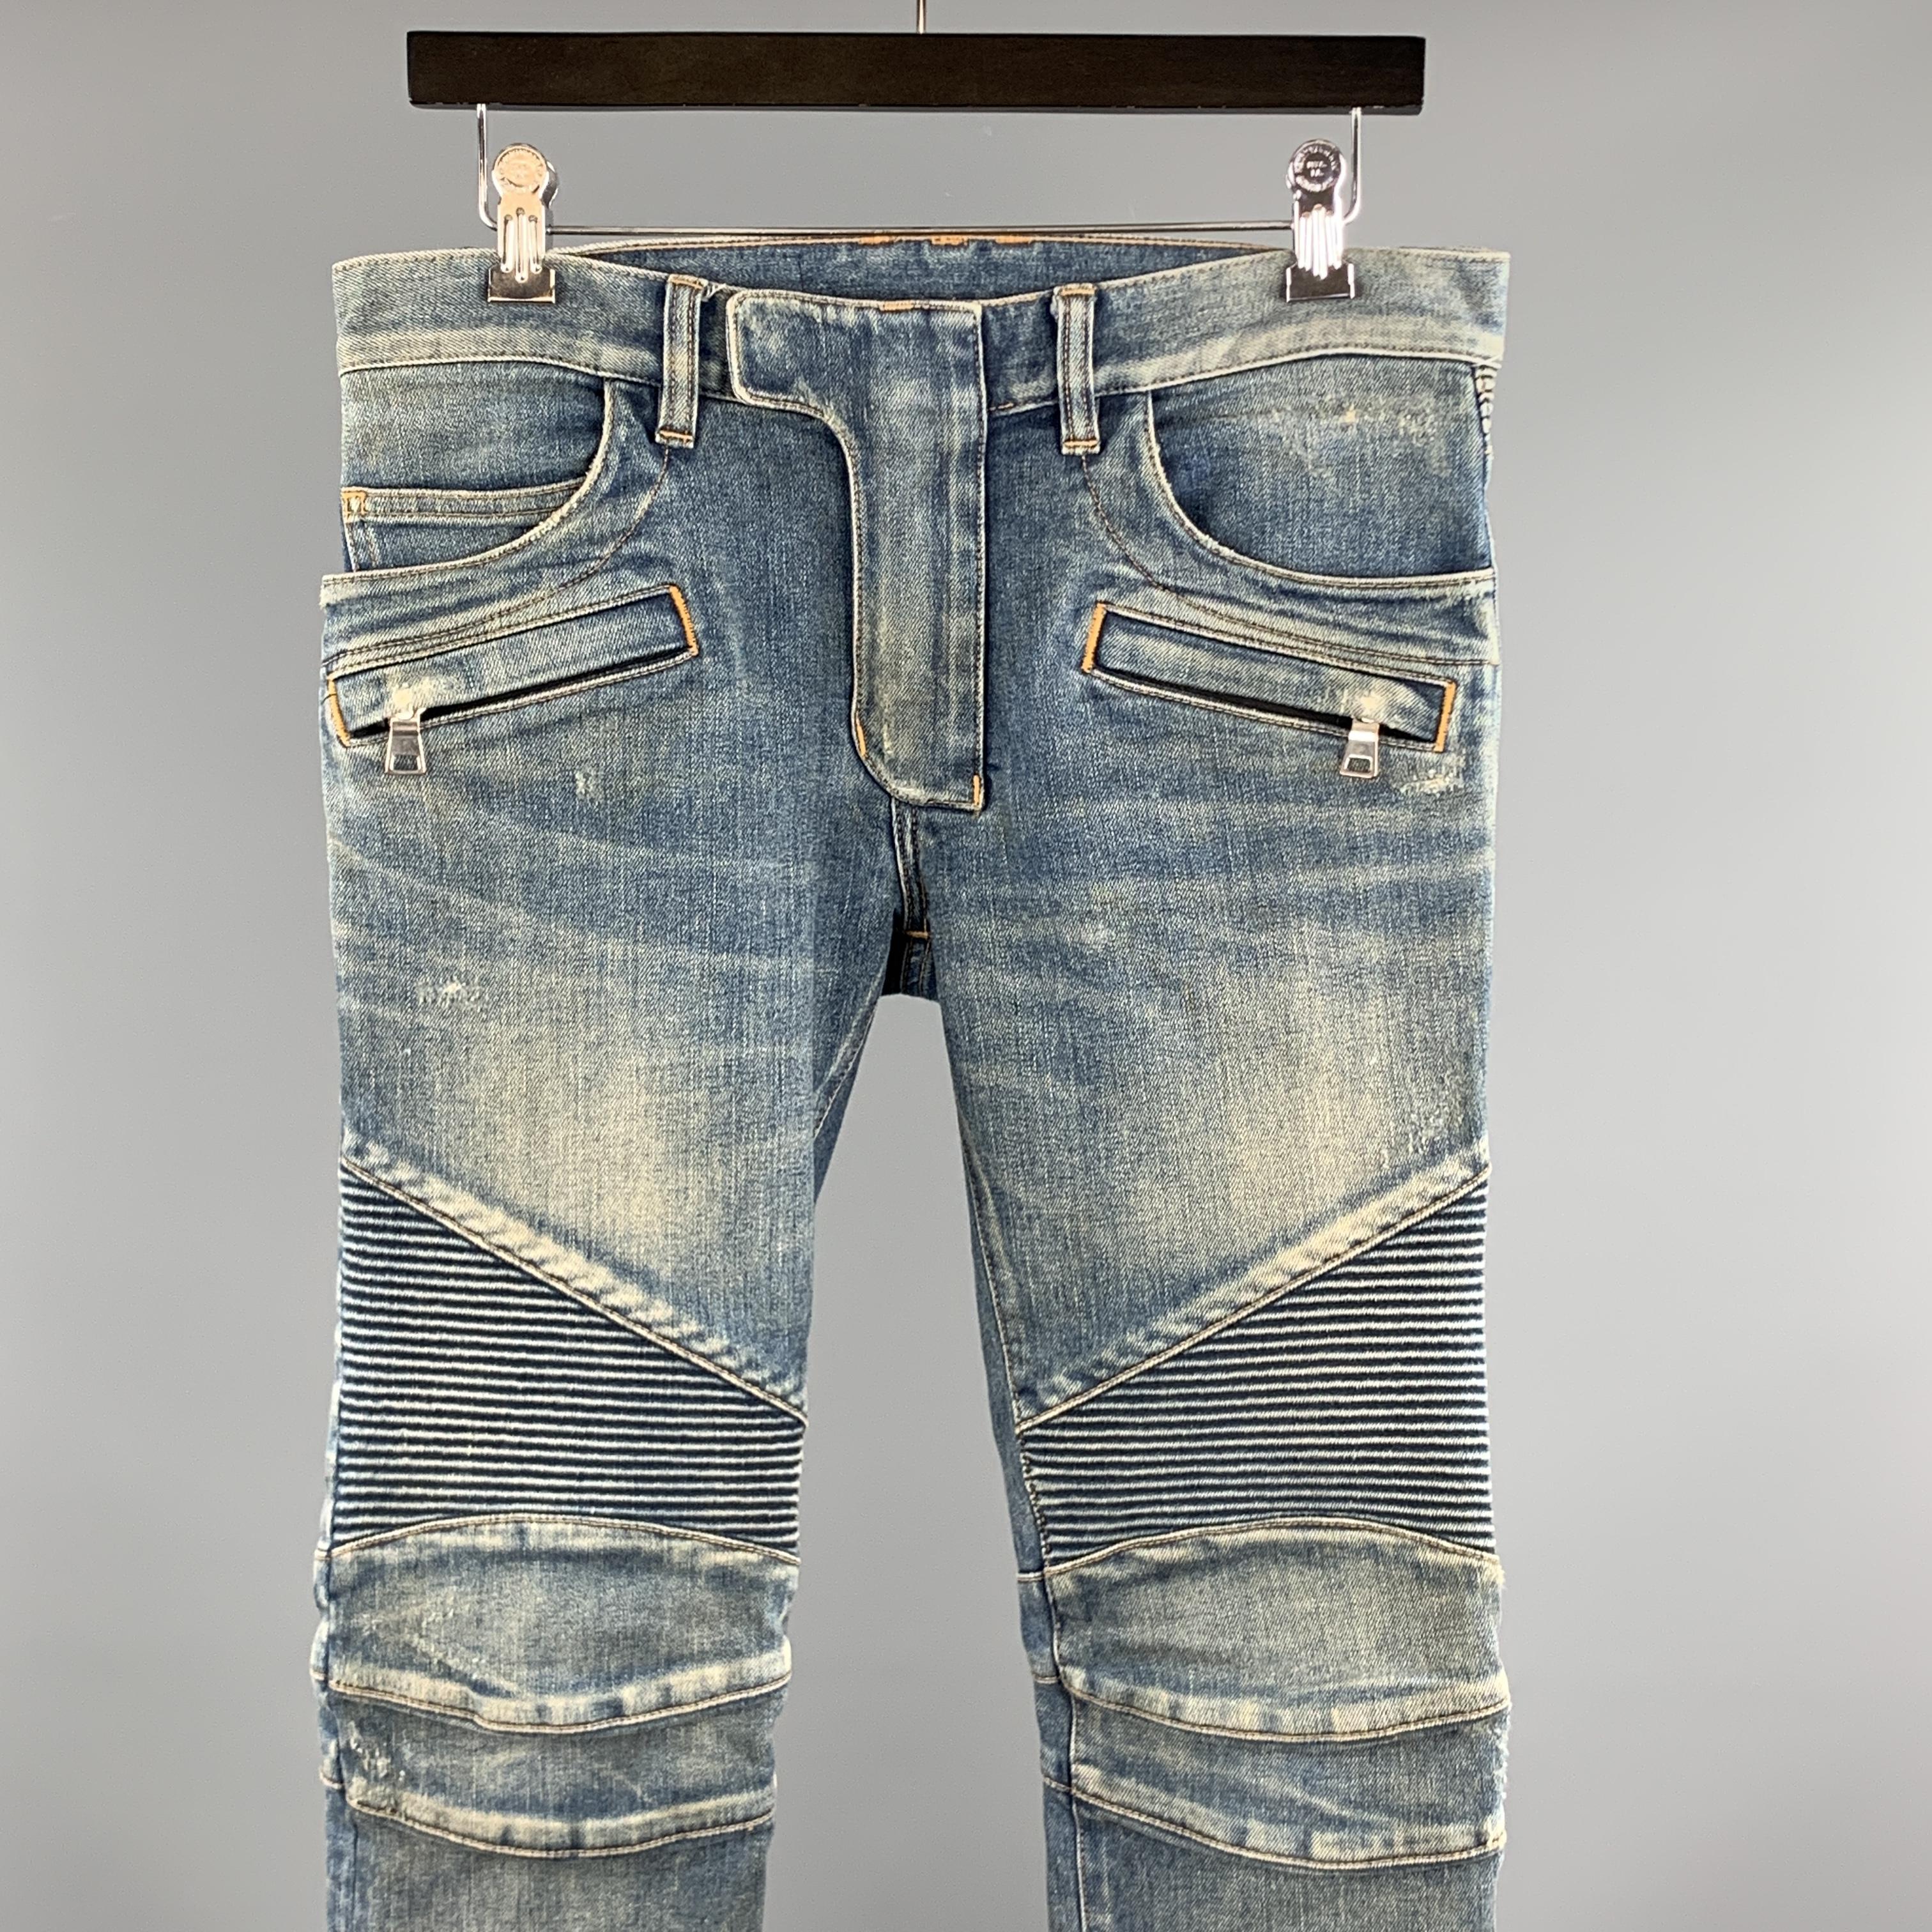 BALMAIN Jeans comes in a indigo wash denim featuring a biker style, ribbed knee panels, contrast stitching, zip fly, and a front tab closure. Made in Japan. 

Excellent Pre-Owned Condition.
Marked: 28

Measurements:

Waist: 28 in. 
Rise: 8 in.